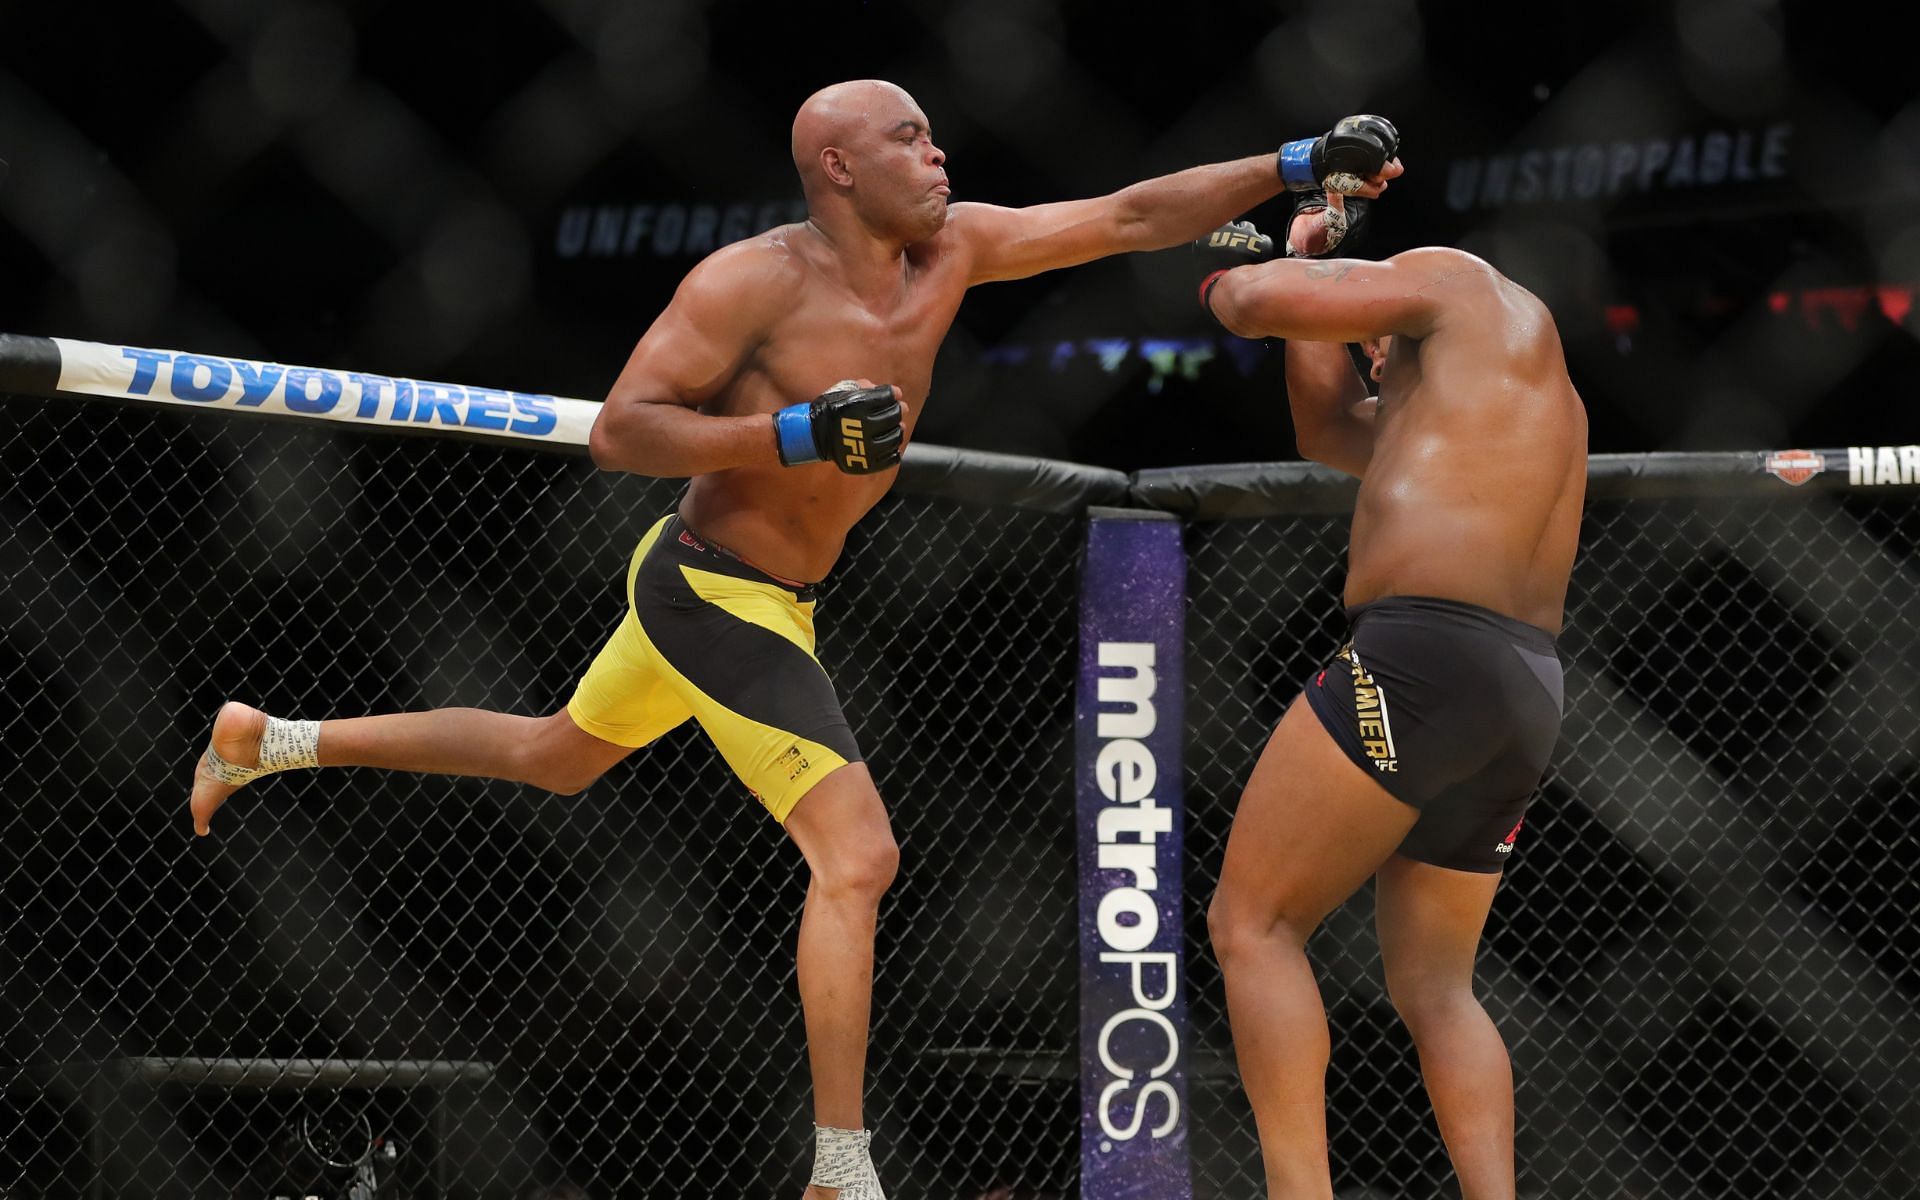 Anderson Silva during his UFC 200 fight against Daniel Cormier